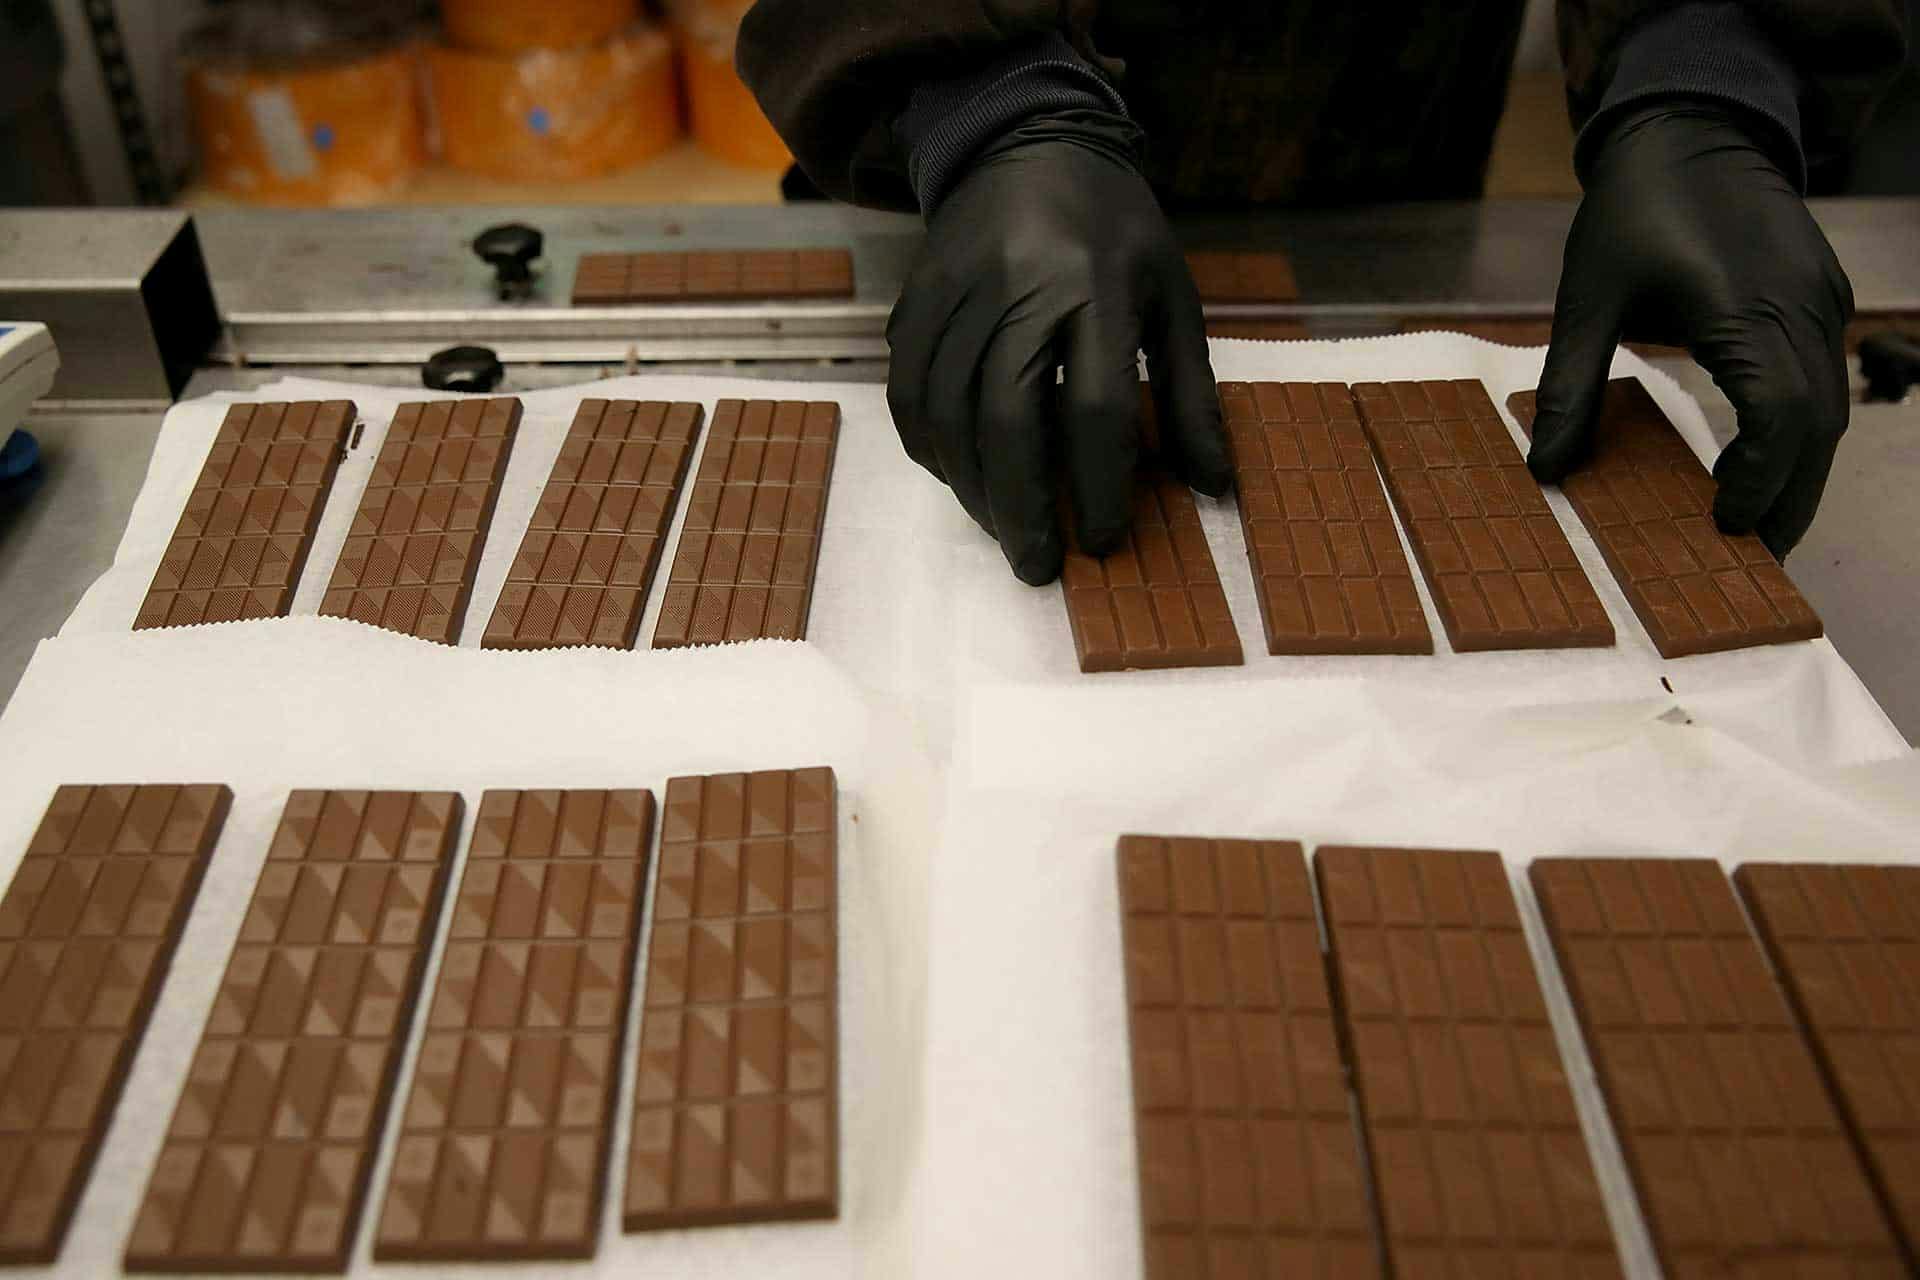 <p>A worker prepares to package freshly made marijuana infused chocolate bars at Kiva Confections on January 16, 2018 in Oakland, California. Less than one month after recreational marijuana sales became legal in California, dispensaries are reporting a shortage in pot edibles. The number of manufacturers in the state has been reduced by nearly two thirds due to new regulations and state approved potency levels. (Photo by Justin Sullivan/Getty Images)</p>
